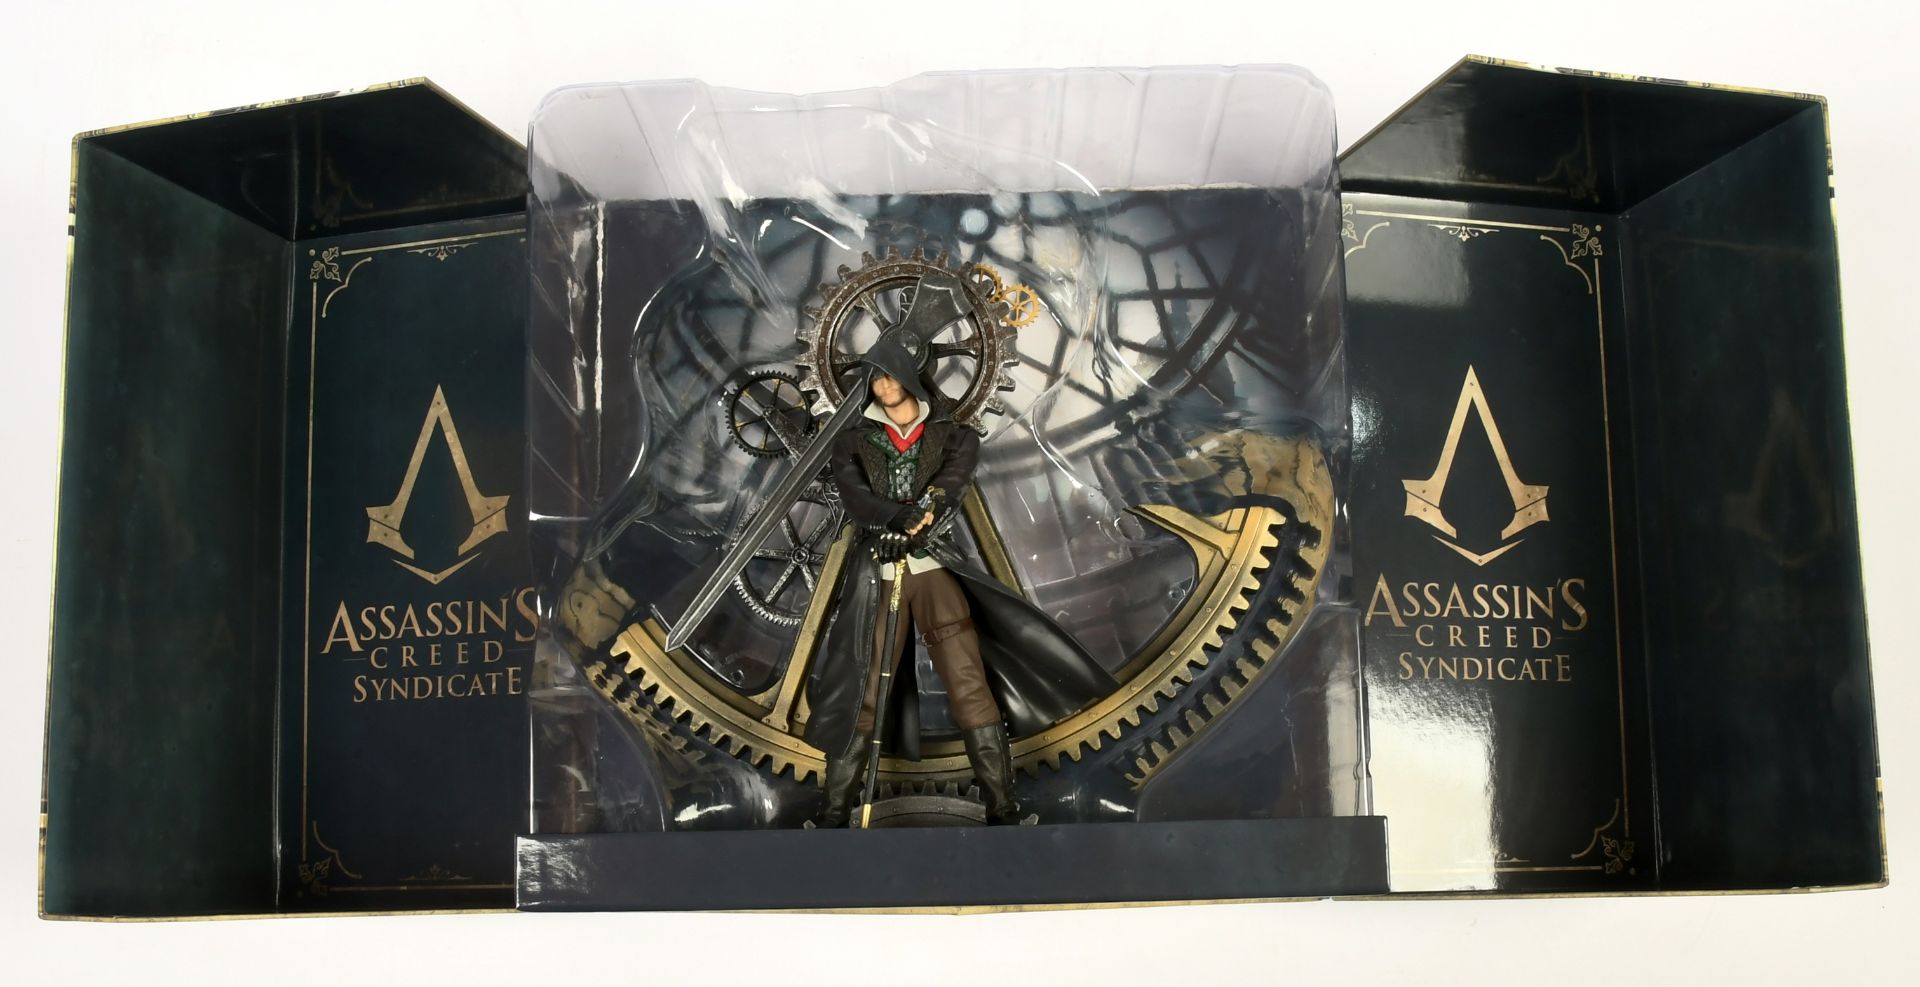 Assassin's Creed Syndicate Big Ben Collector's Box (No Game Disc) - Image 2 of 3